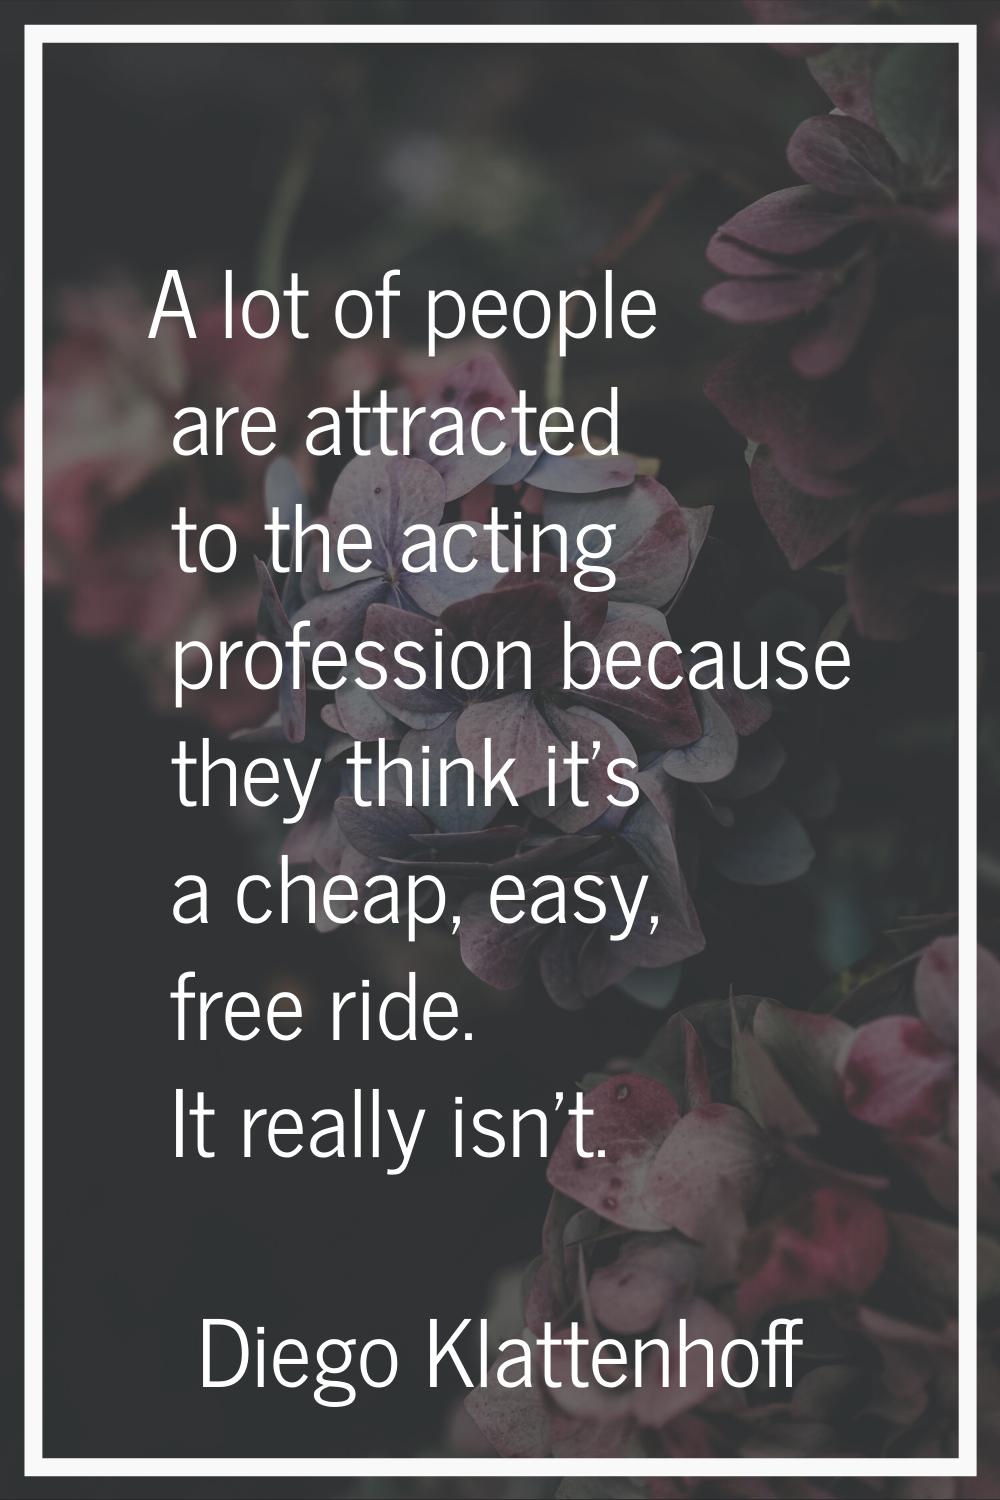 A lot of people are attracted to the acting profession because they think it's a cheap, easy, free 